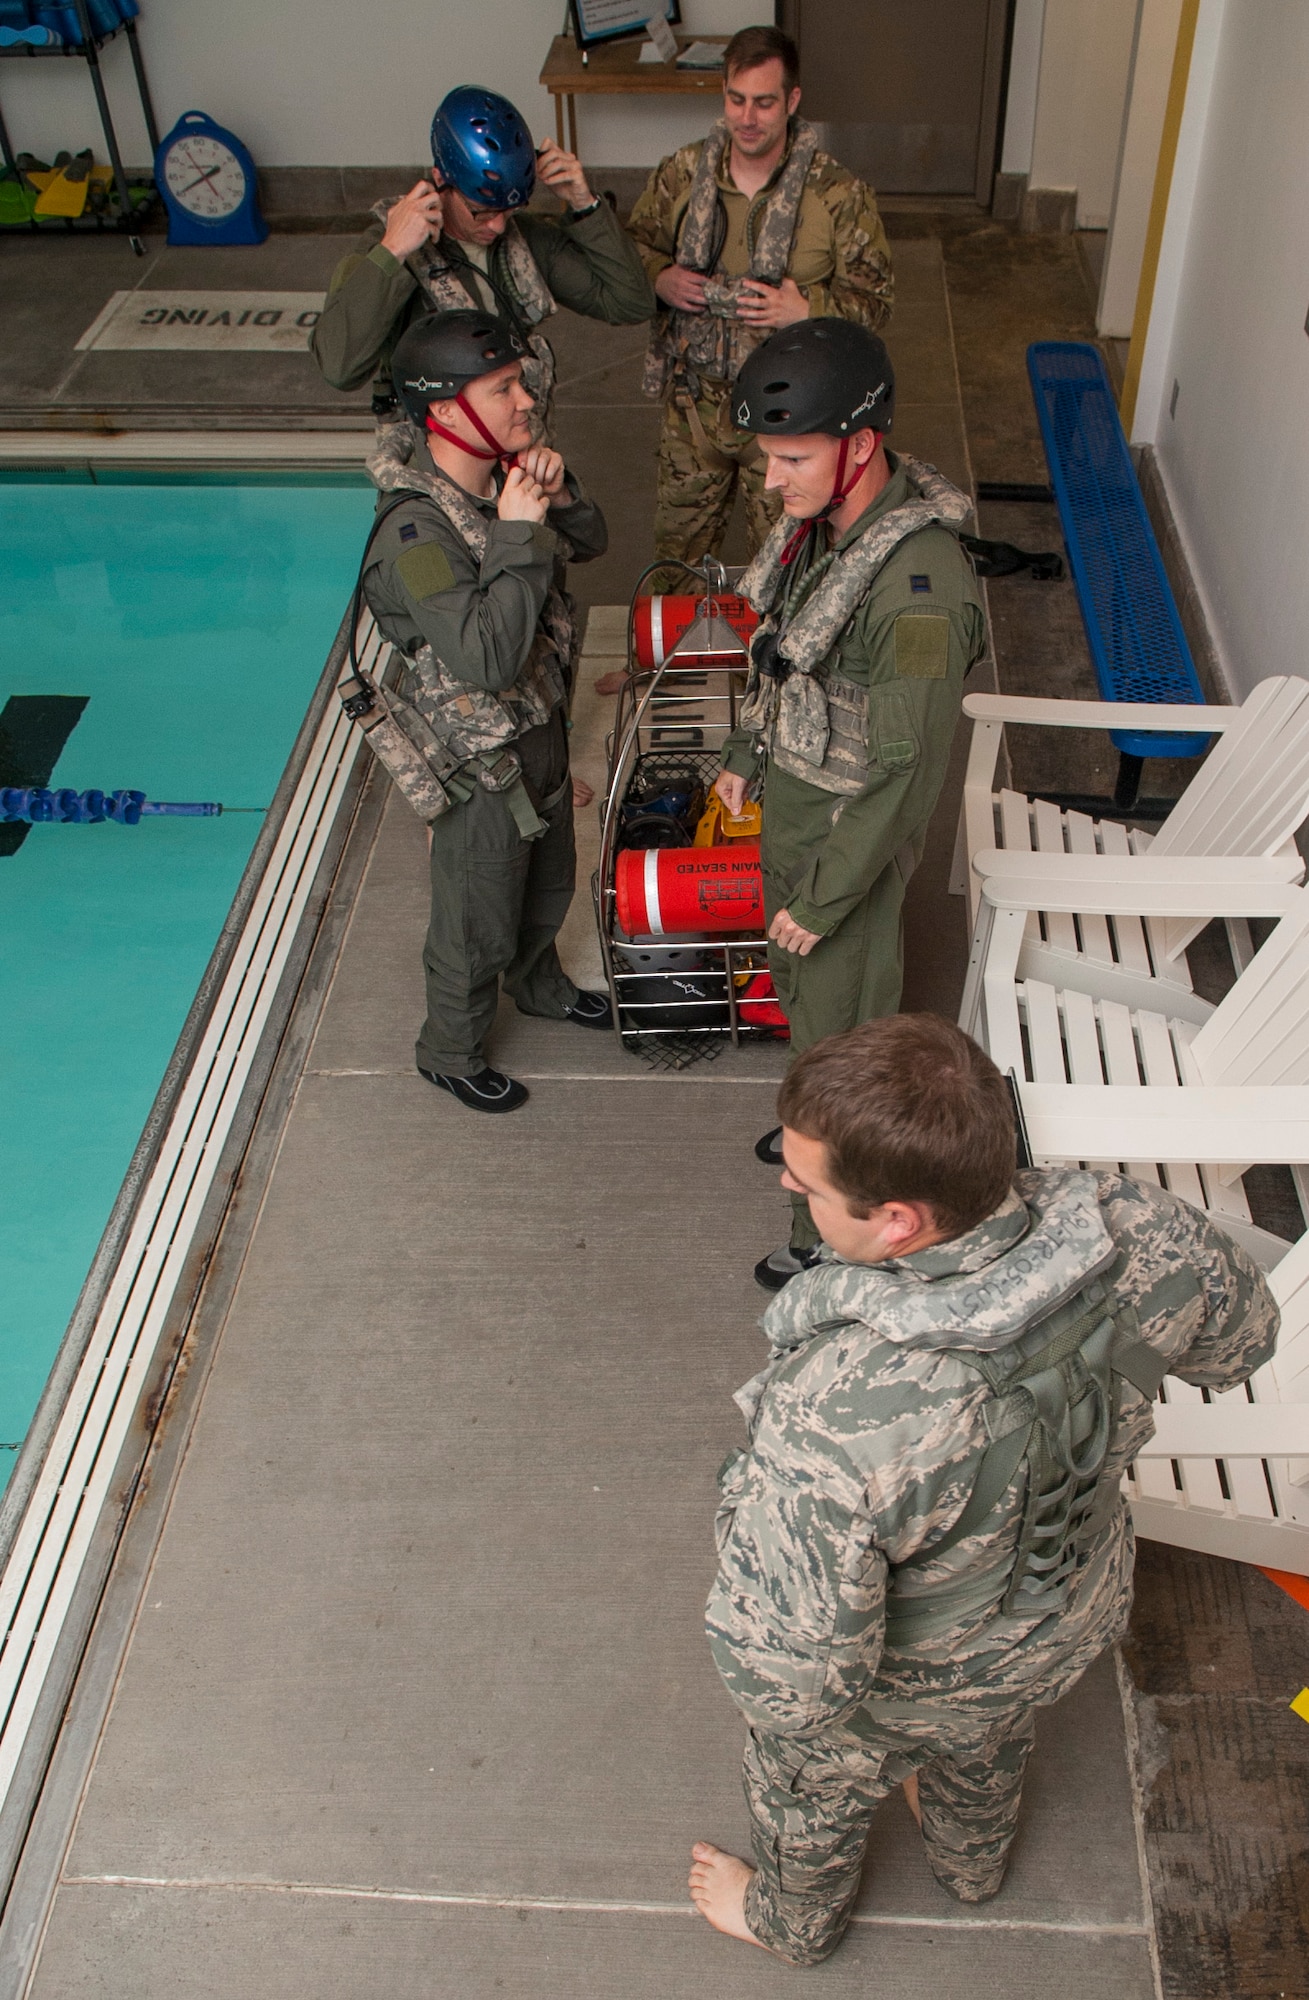 Members of the 54th Helicopter Squadron prepare for underwater egress survival training at Minot Air Force Base, N.D., June 22, 2017. The training included demonstrations on how to escape a simulated helicopter crash and properly use common rescue devices. (U.S. Air Force photo by Airman 1st Class Jonathan McElderry)